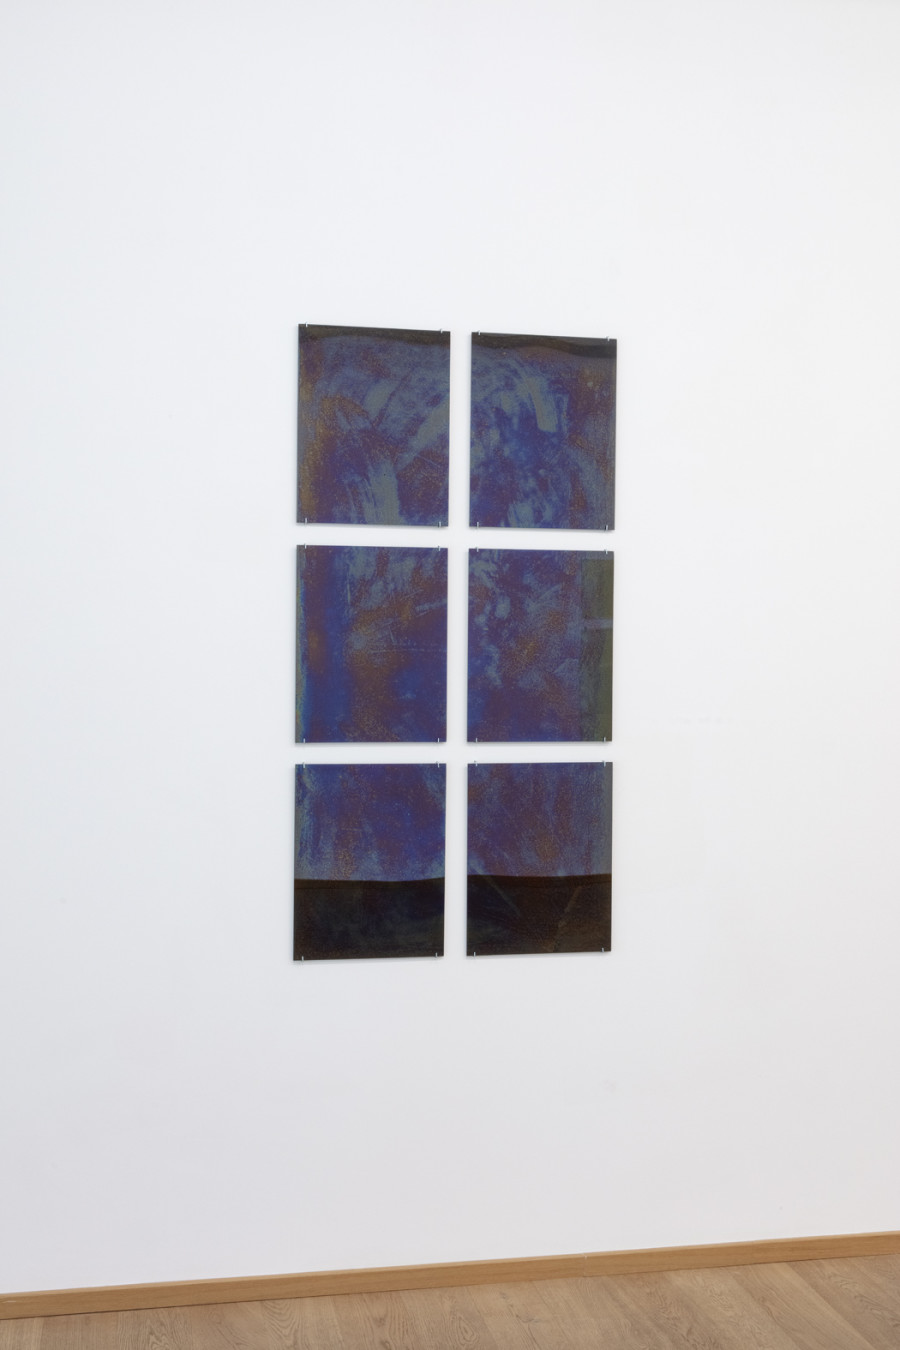 Esther Mathis, Fenster, installation view, Livie Gallery, photos: Esther Mathis